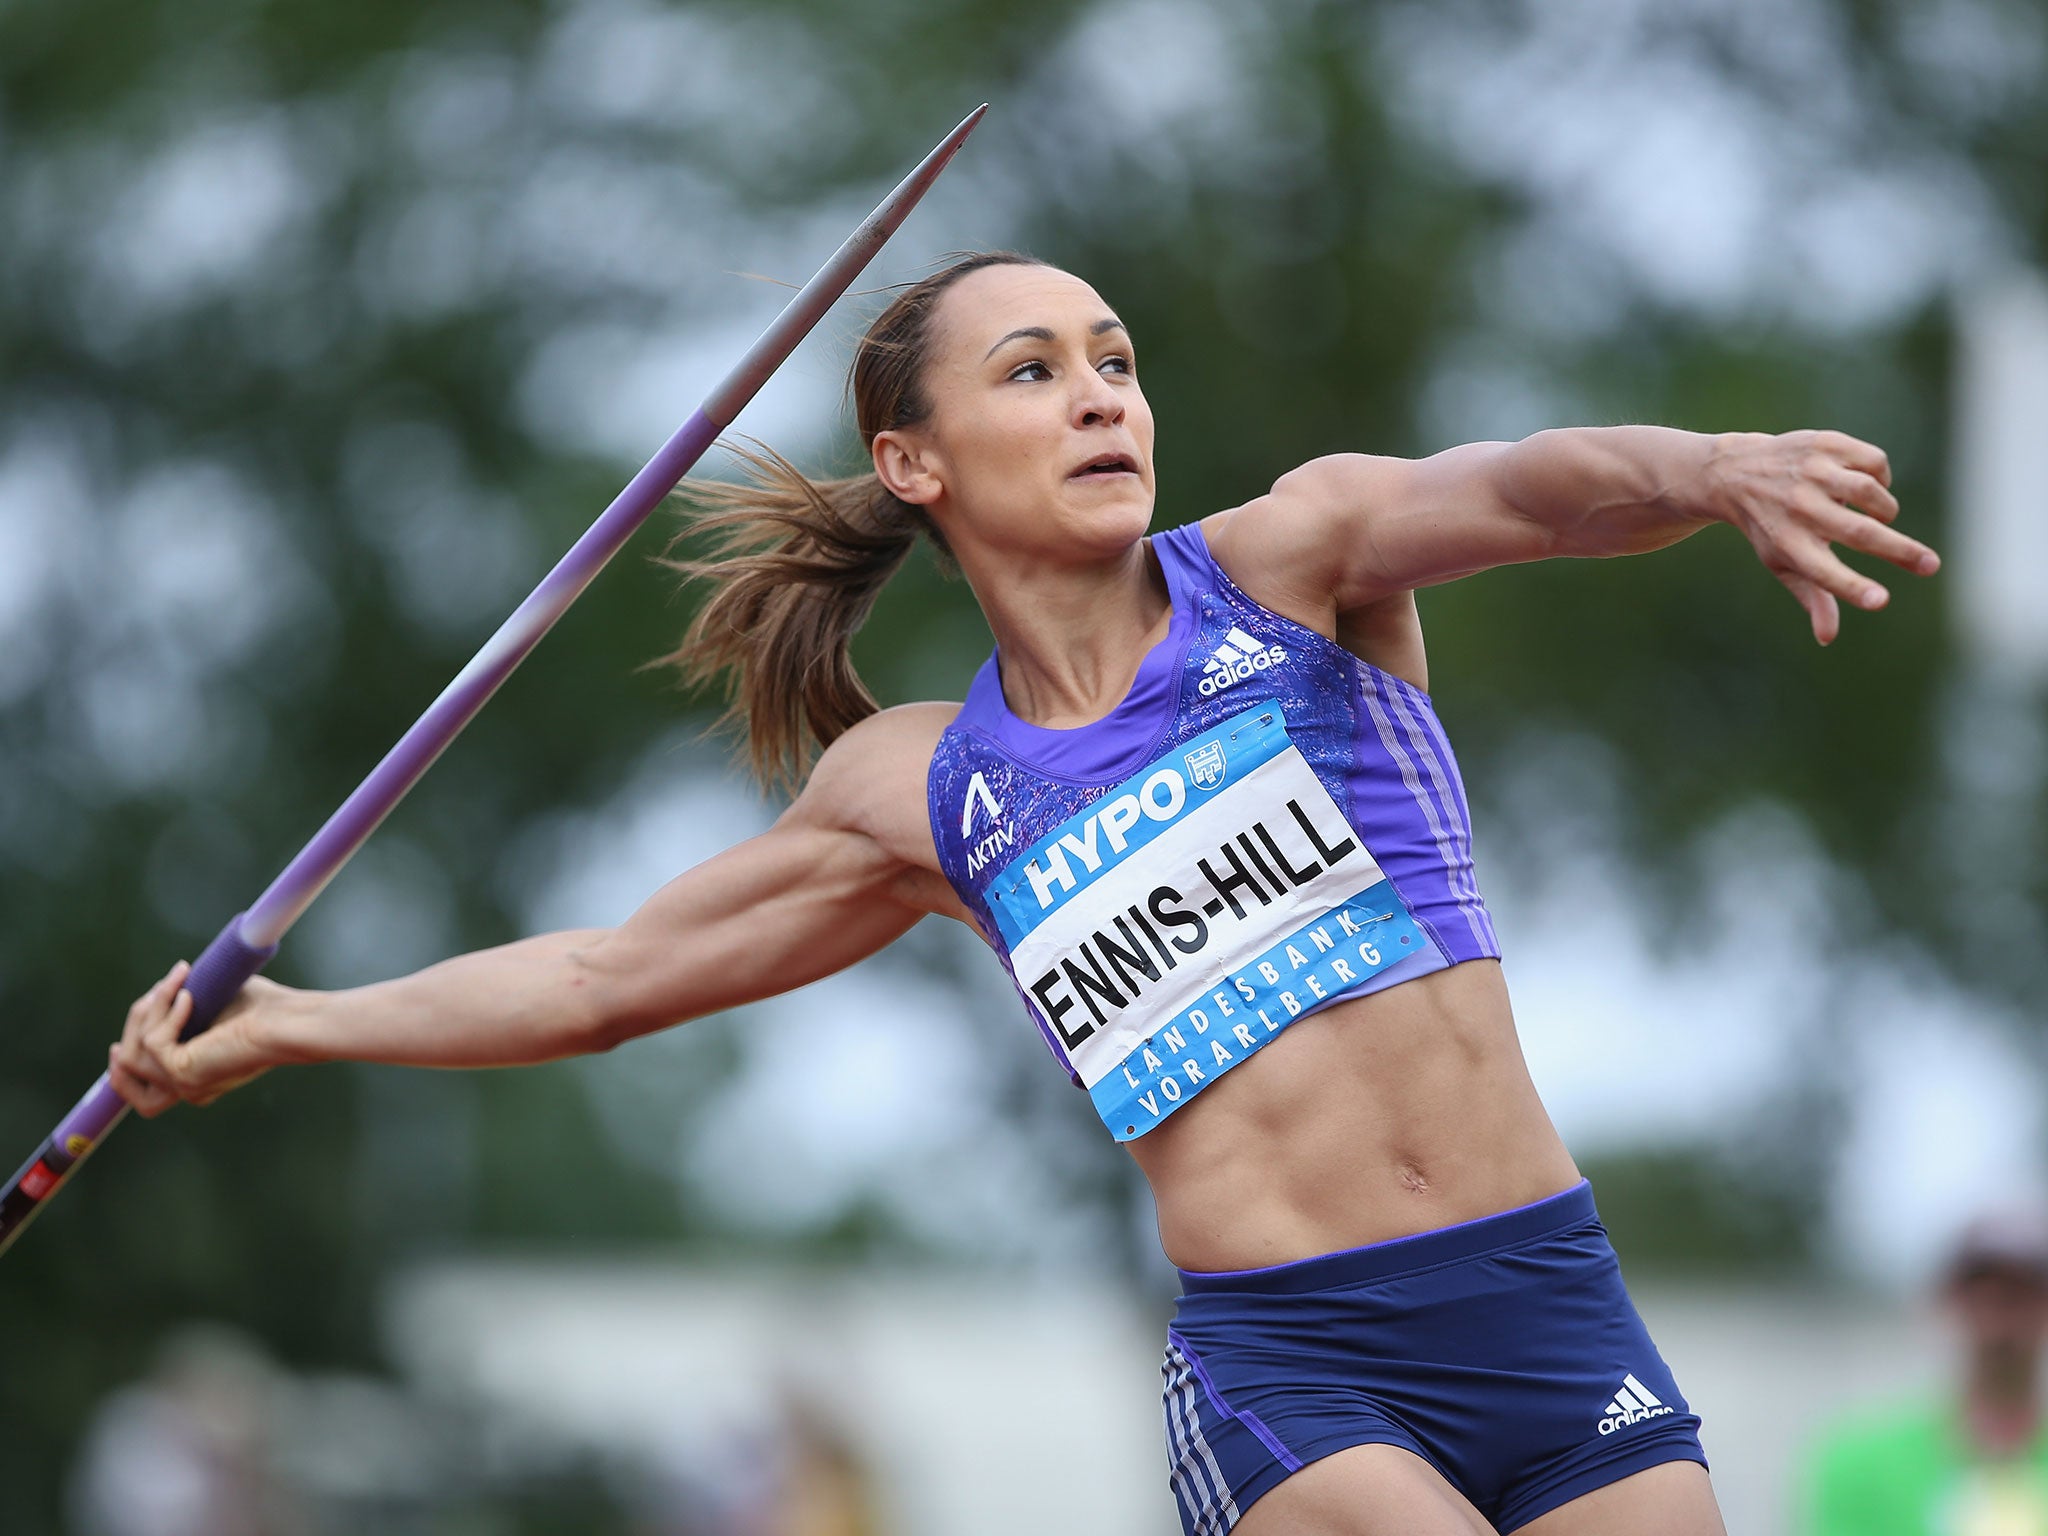 Jessica Ennis-Hill put down a marker by qualifying for the Olympics in Austria at the weekend